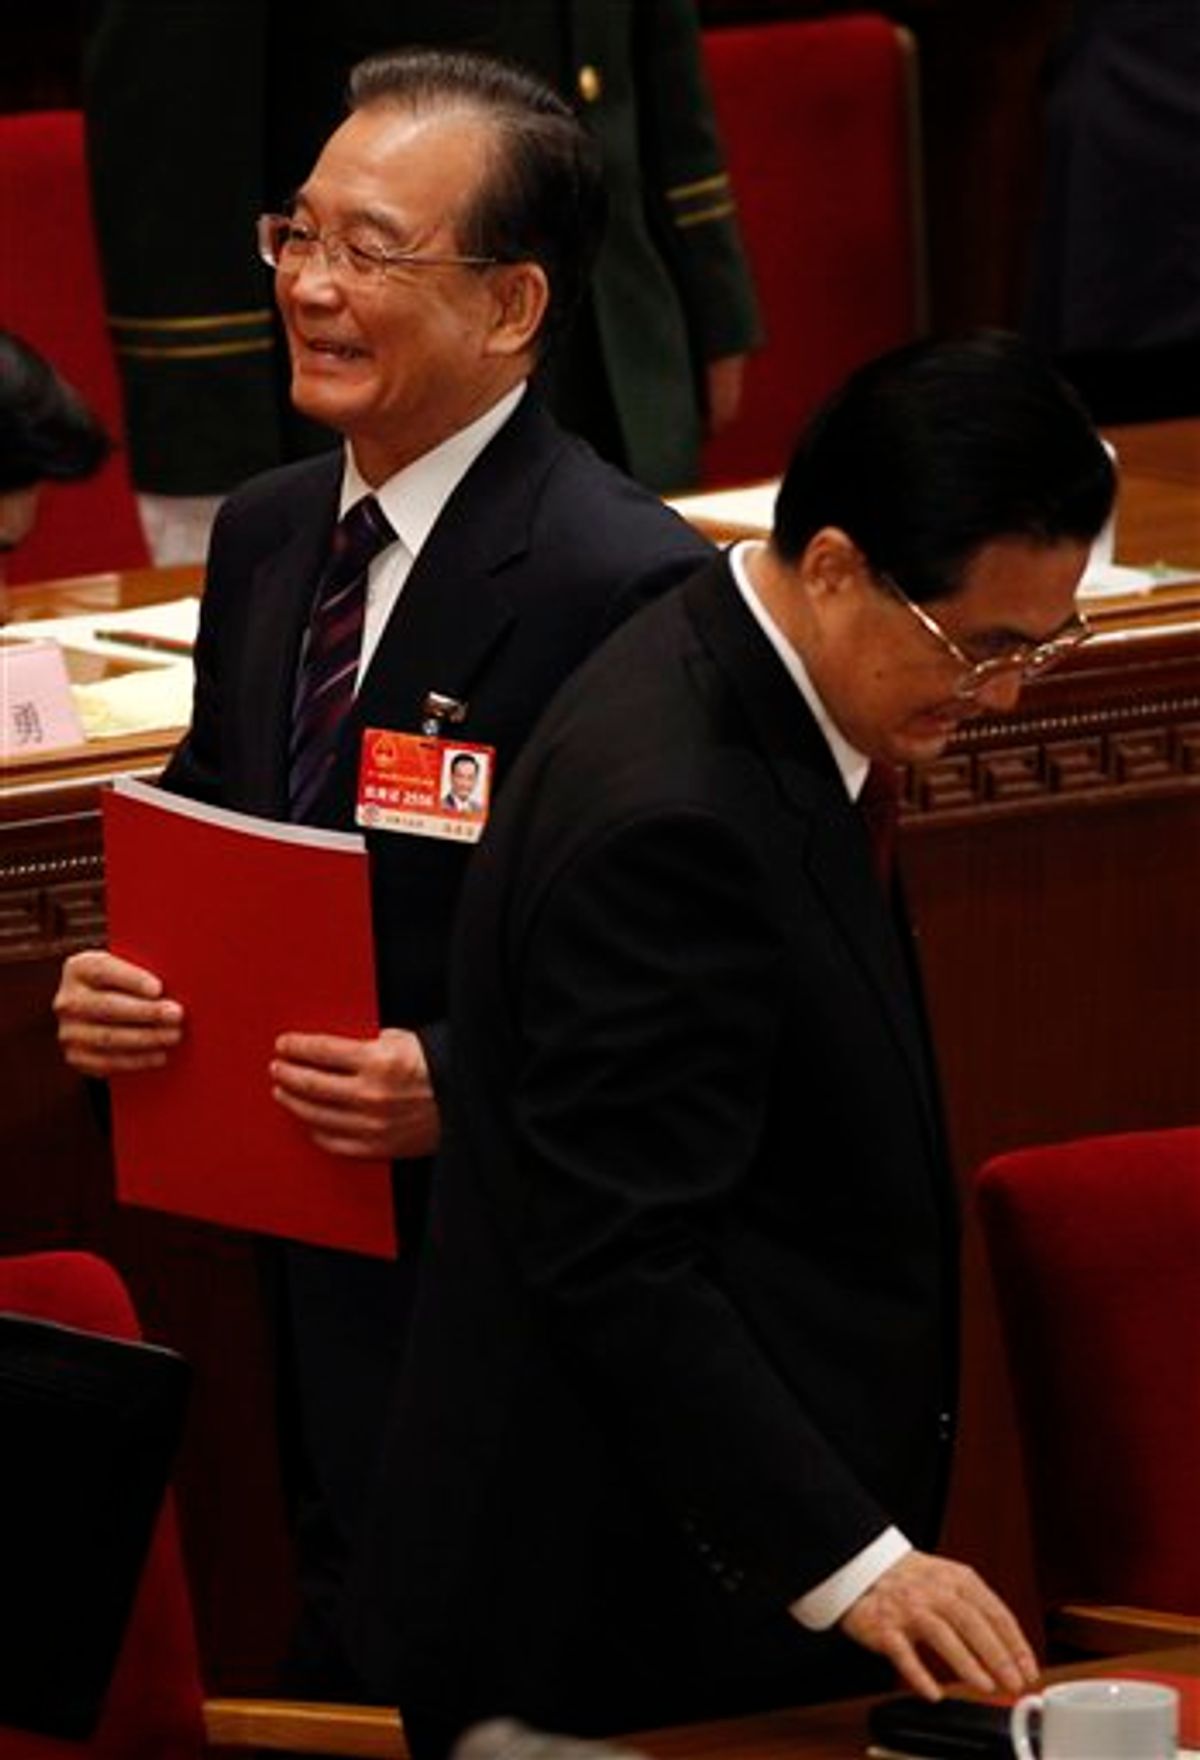 Chinese Premier Wen Jiabao, left, walks next to Chinese President Hu Jintao after the closing session of the annual National People's Congress in Beijing's Great Hall of the People, China, Monday, March 14, 2011. (AP Photo/Vincent Thian)  (AP)